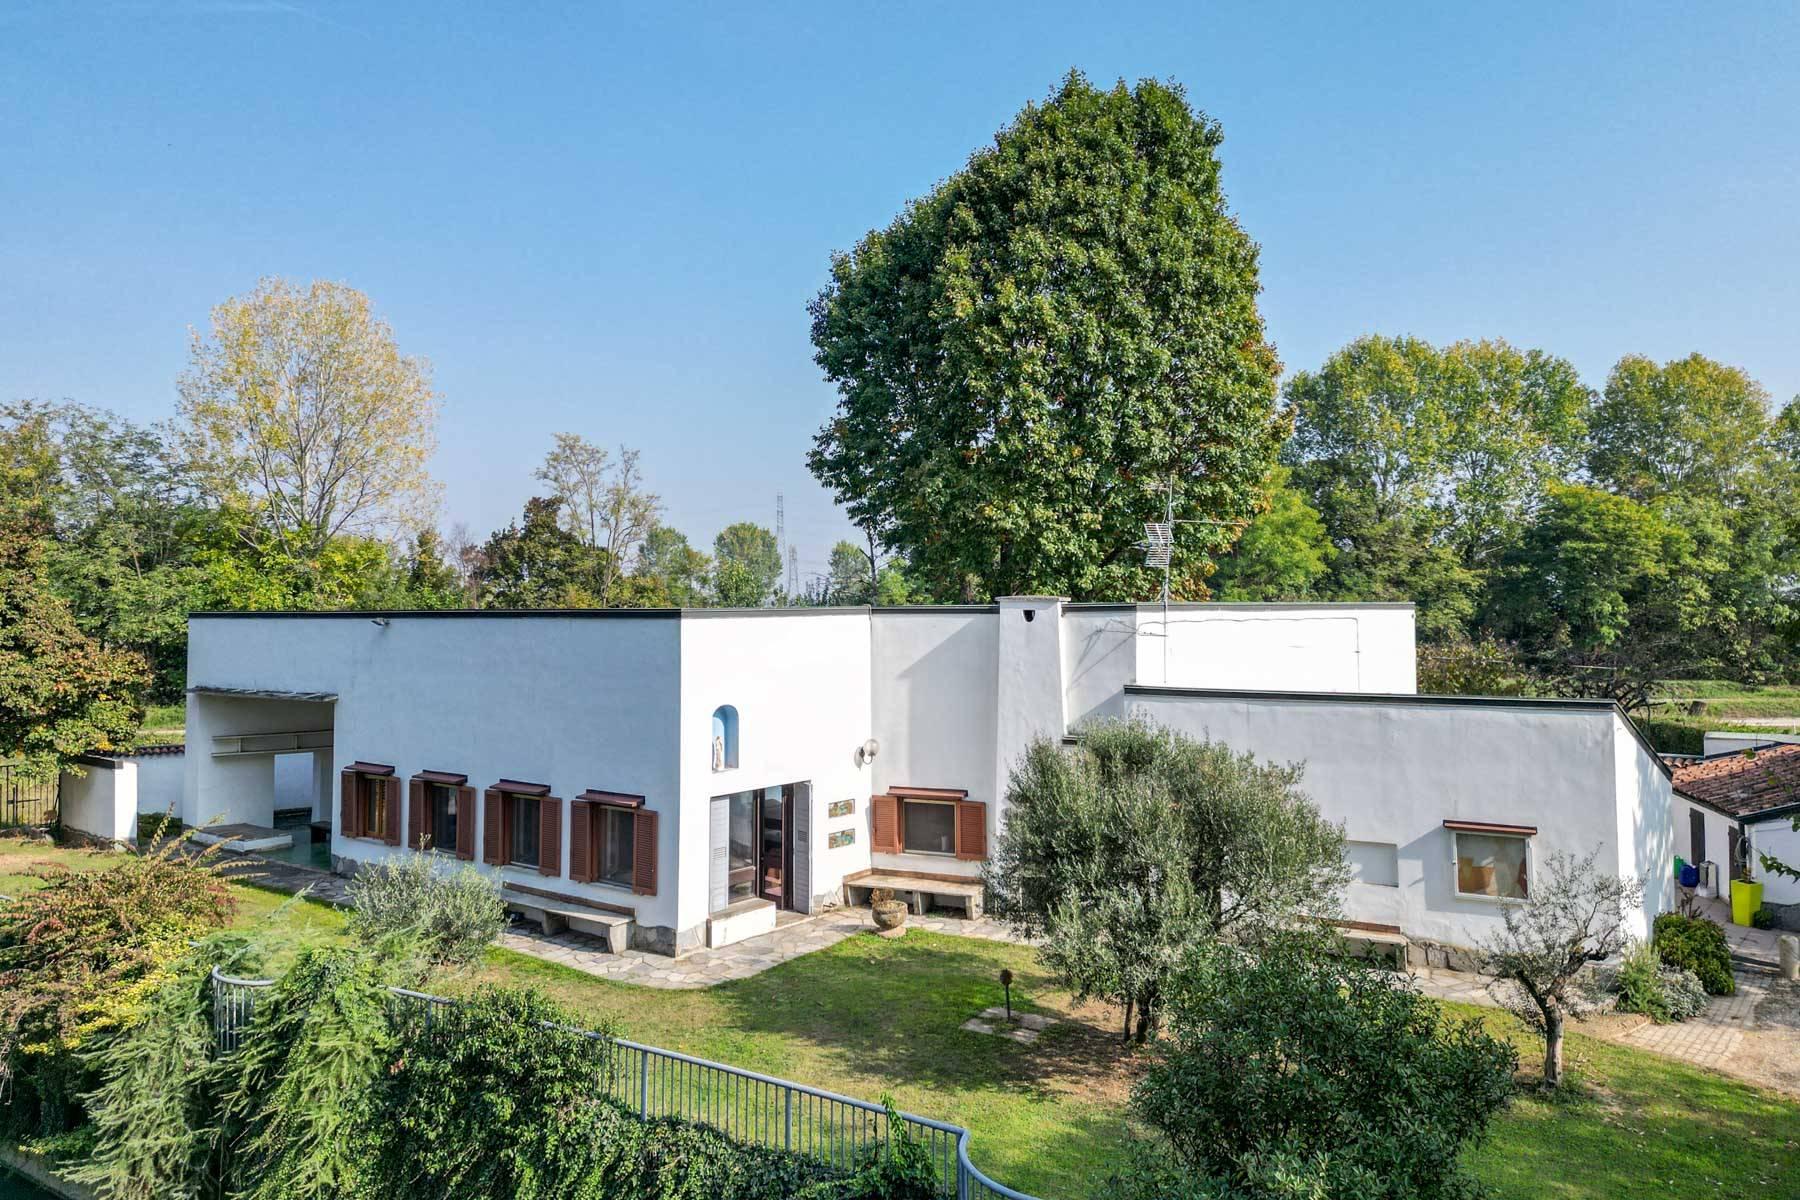 Villino Marmont, an evocative example of rationalist architecture - 1